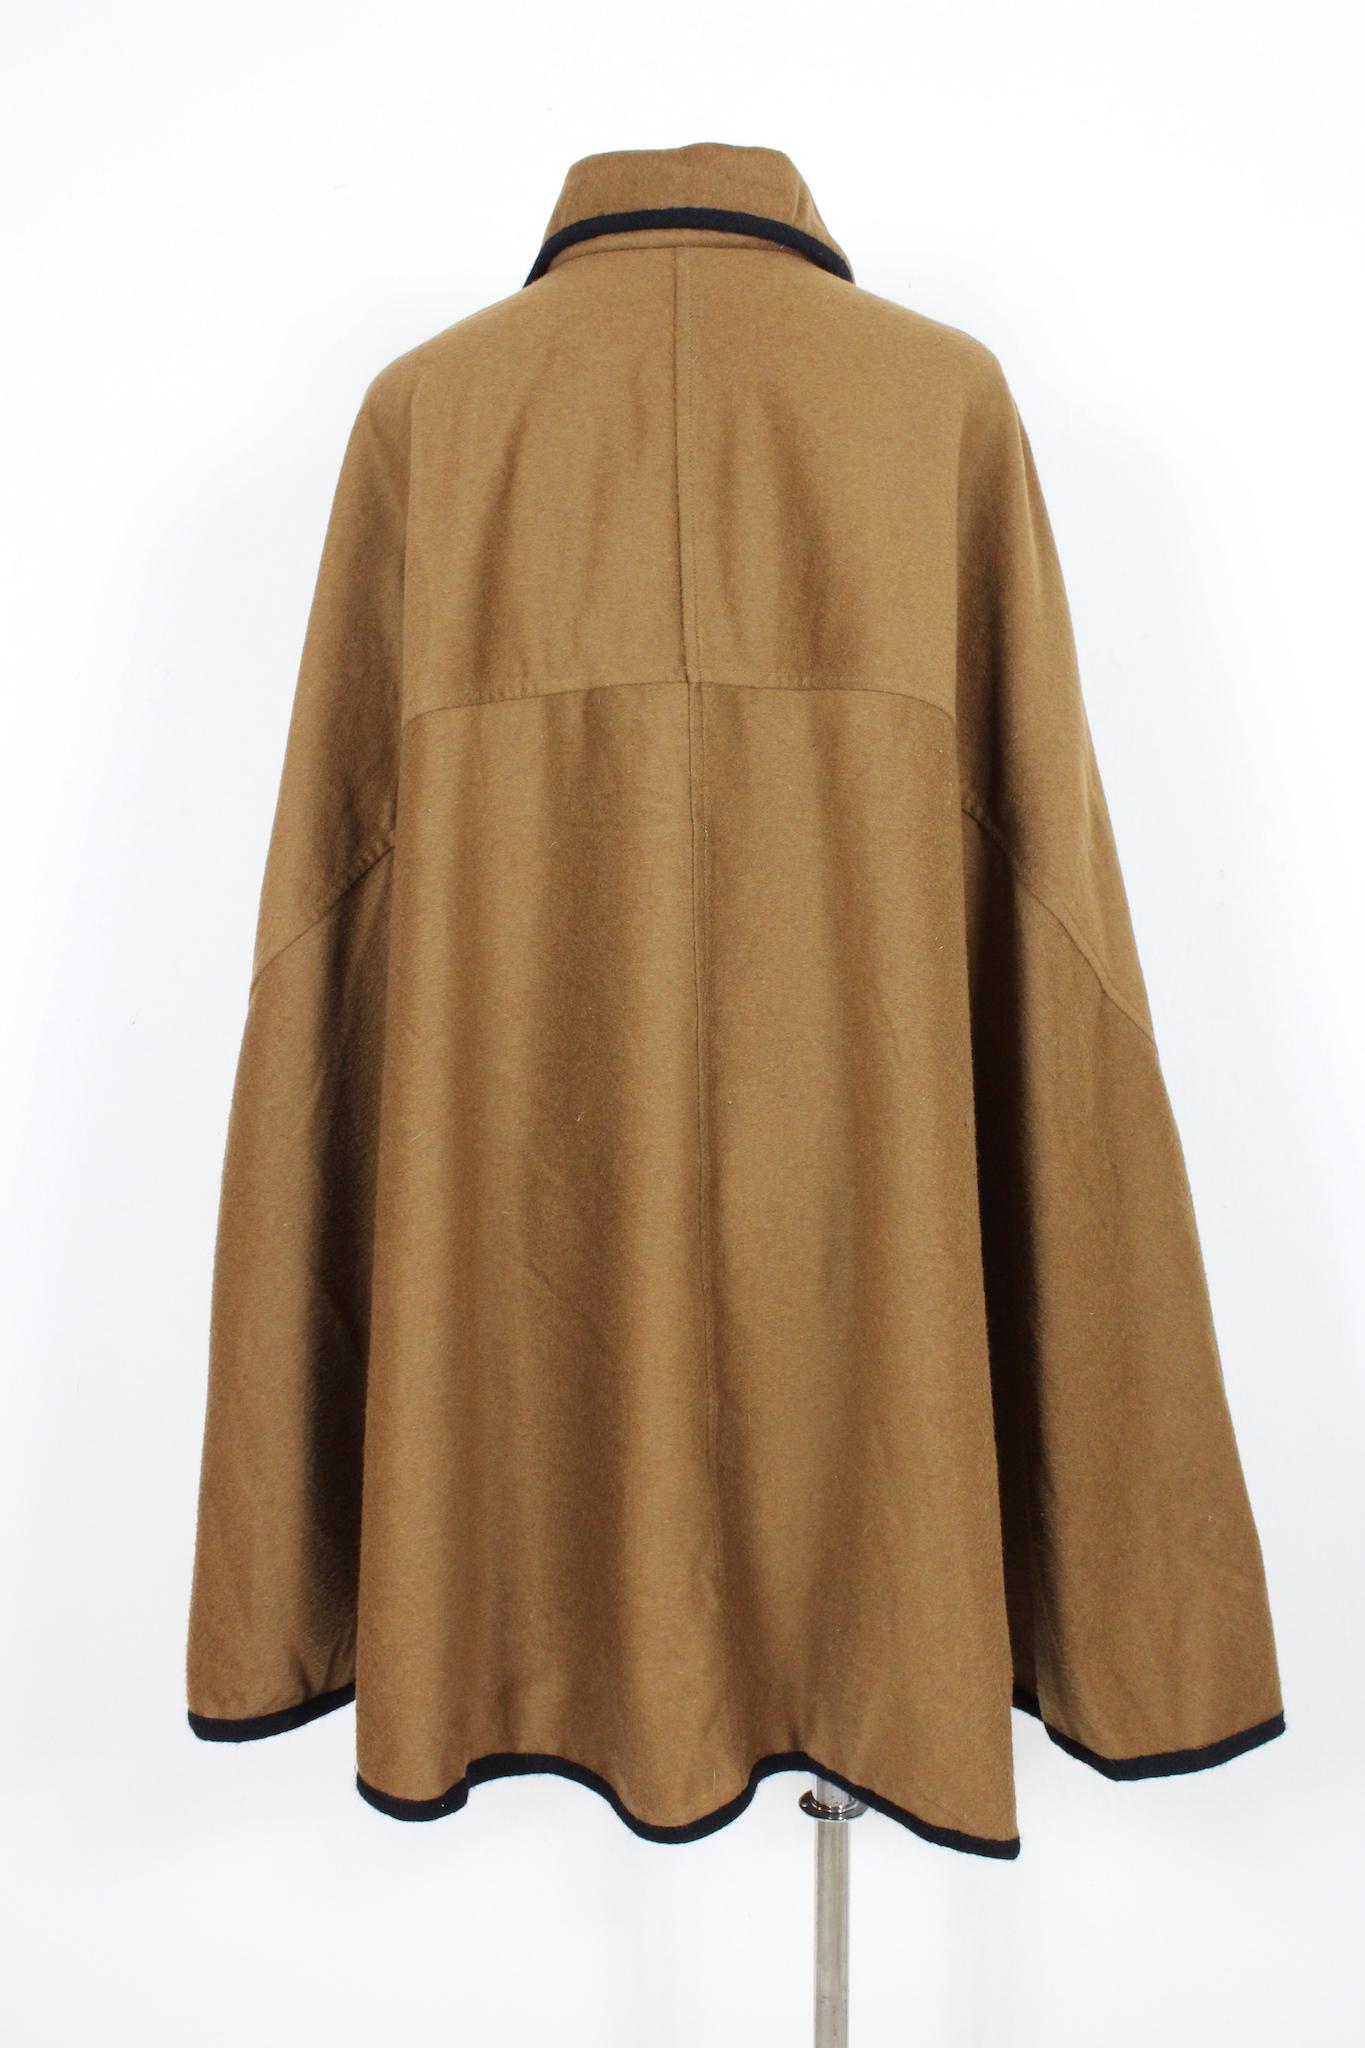 Roberta di Camerino vintage 80s enveloping cape. Brown color with black edges, clip closure at the neck. Gold colored pin on the collar. Wool and cashmere fabric, internally lined. Made in Italy.

One size

Width: 100 cm
Length: 103 cm